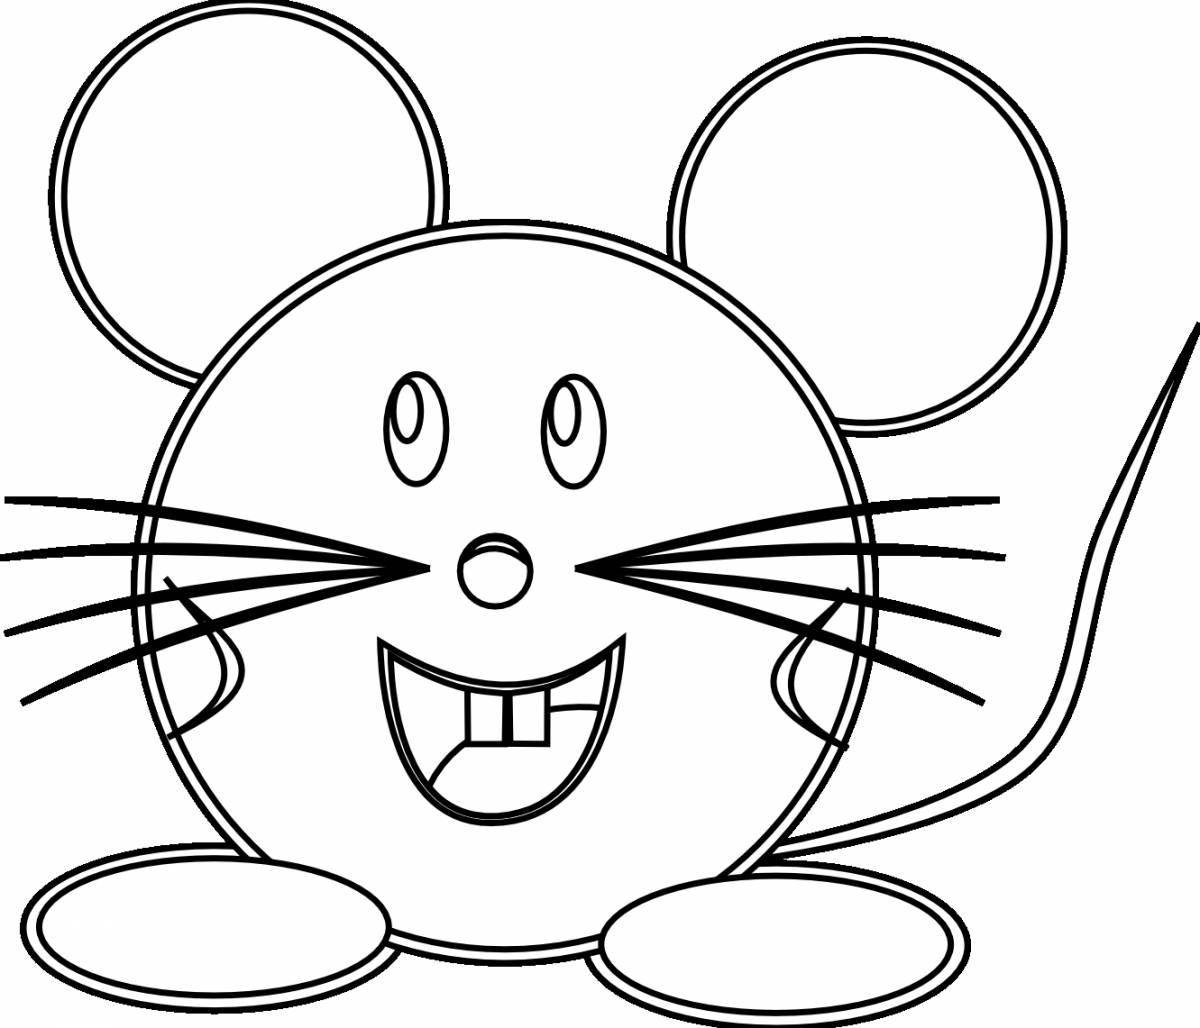 Coloring mouse with colored glasses